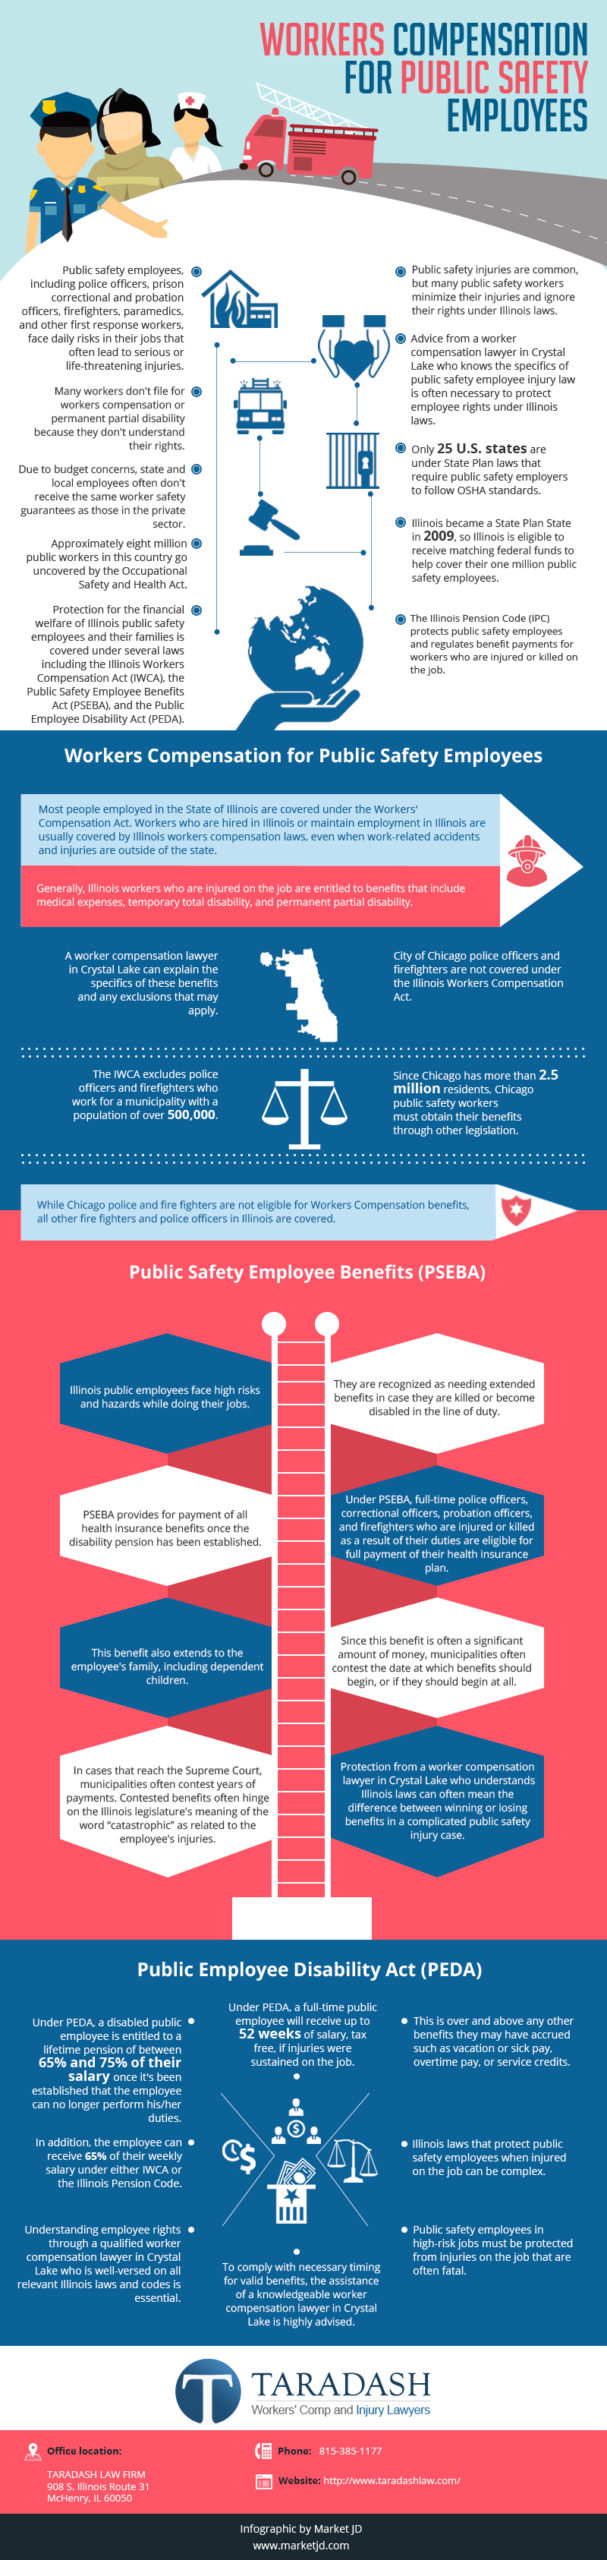 Workers-Compensation-for-Public-Safety-Employees